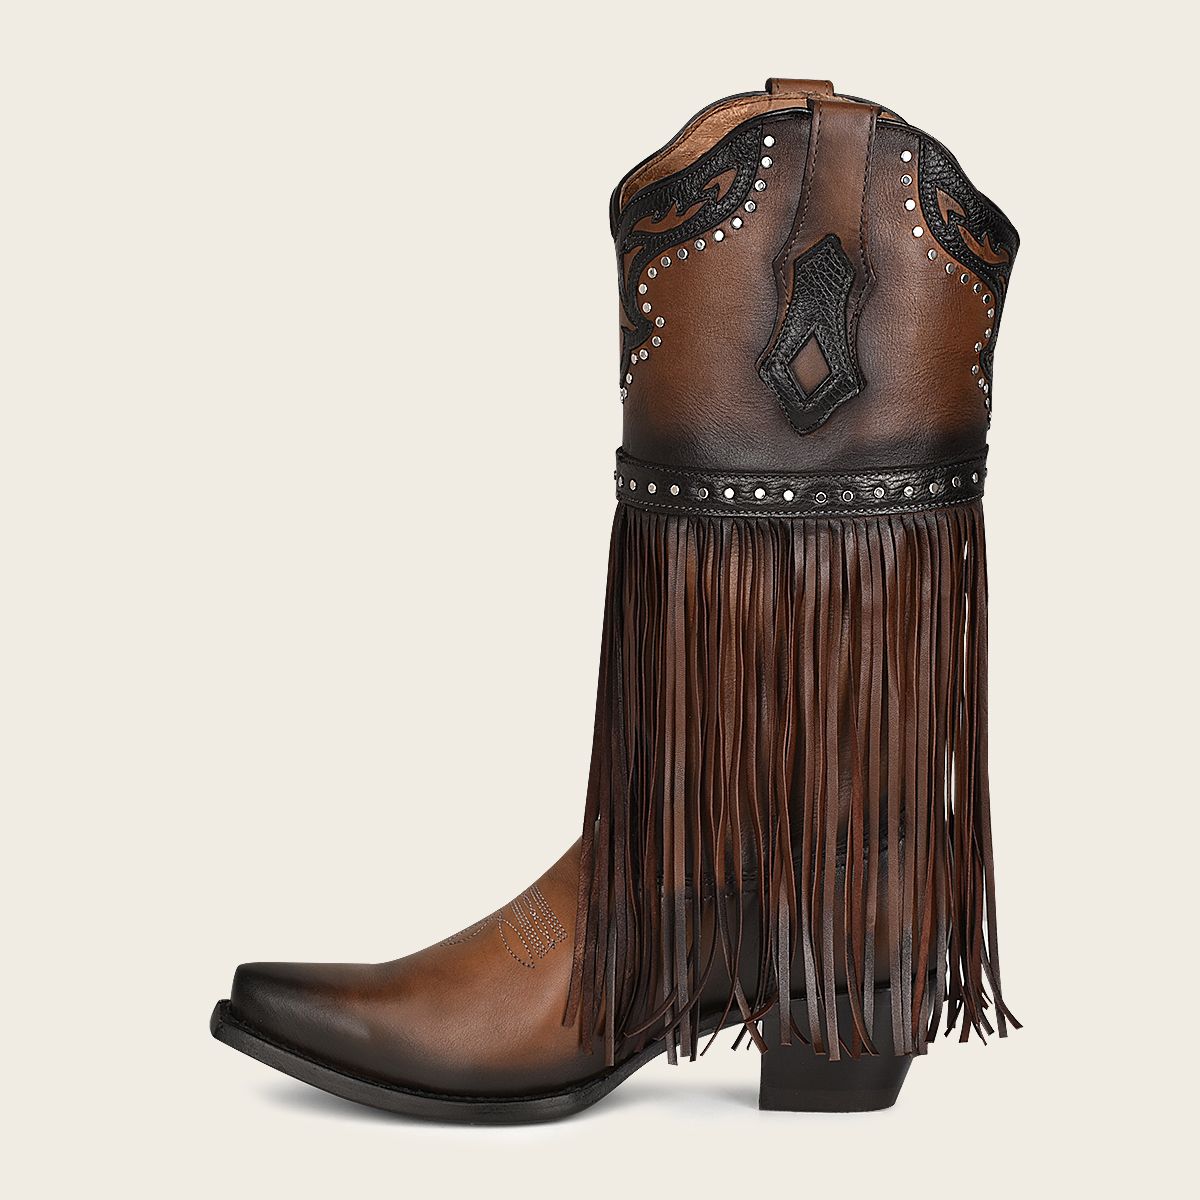 1GAXRS - Cuadra brown western cowgirl fringed leather boots for women-Kuet.us